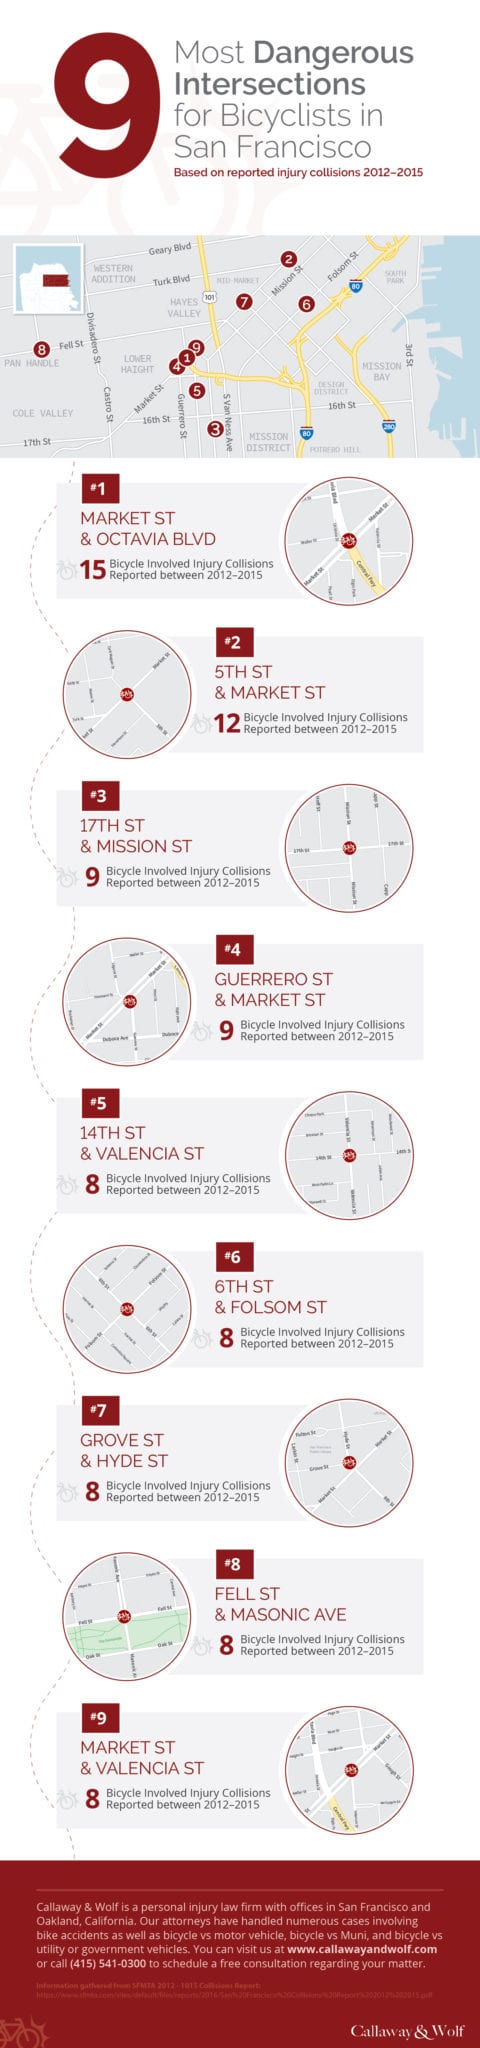 infographic for most dangerous bike intersections in San Francisco